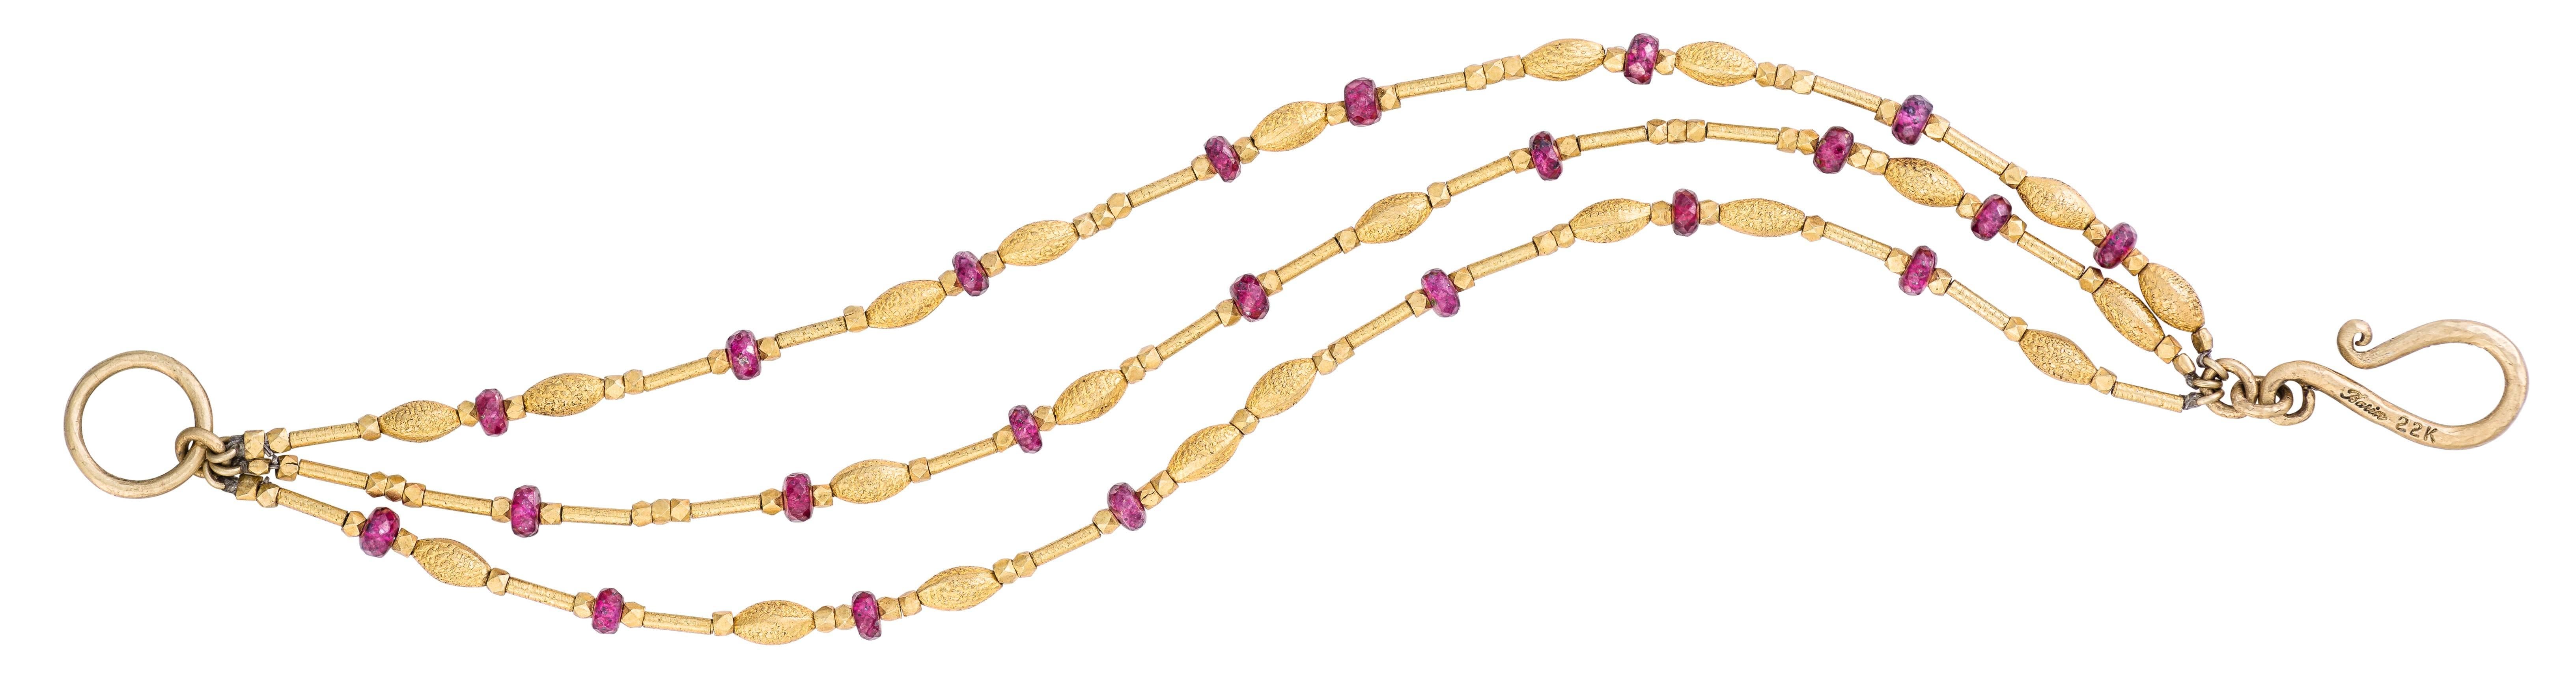 A total of twenty-two beautiful rubies adorn this gold bracelet. A sparkling, "brushed" effect on some of the gold beads adds a touch of sophistication to this already elegant design. Beautiful on any skin tone, the deep gold hues are